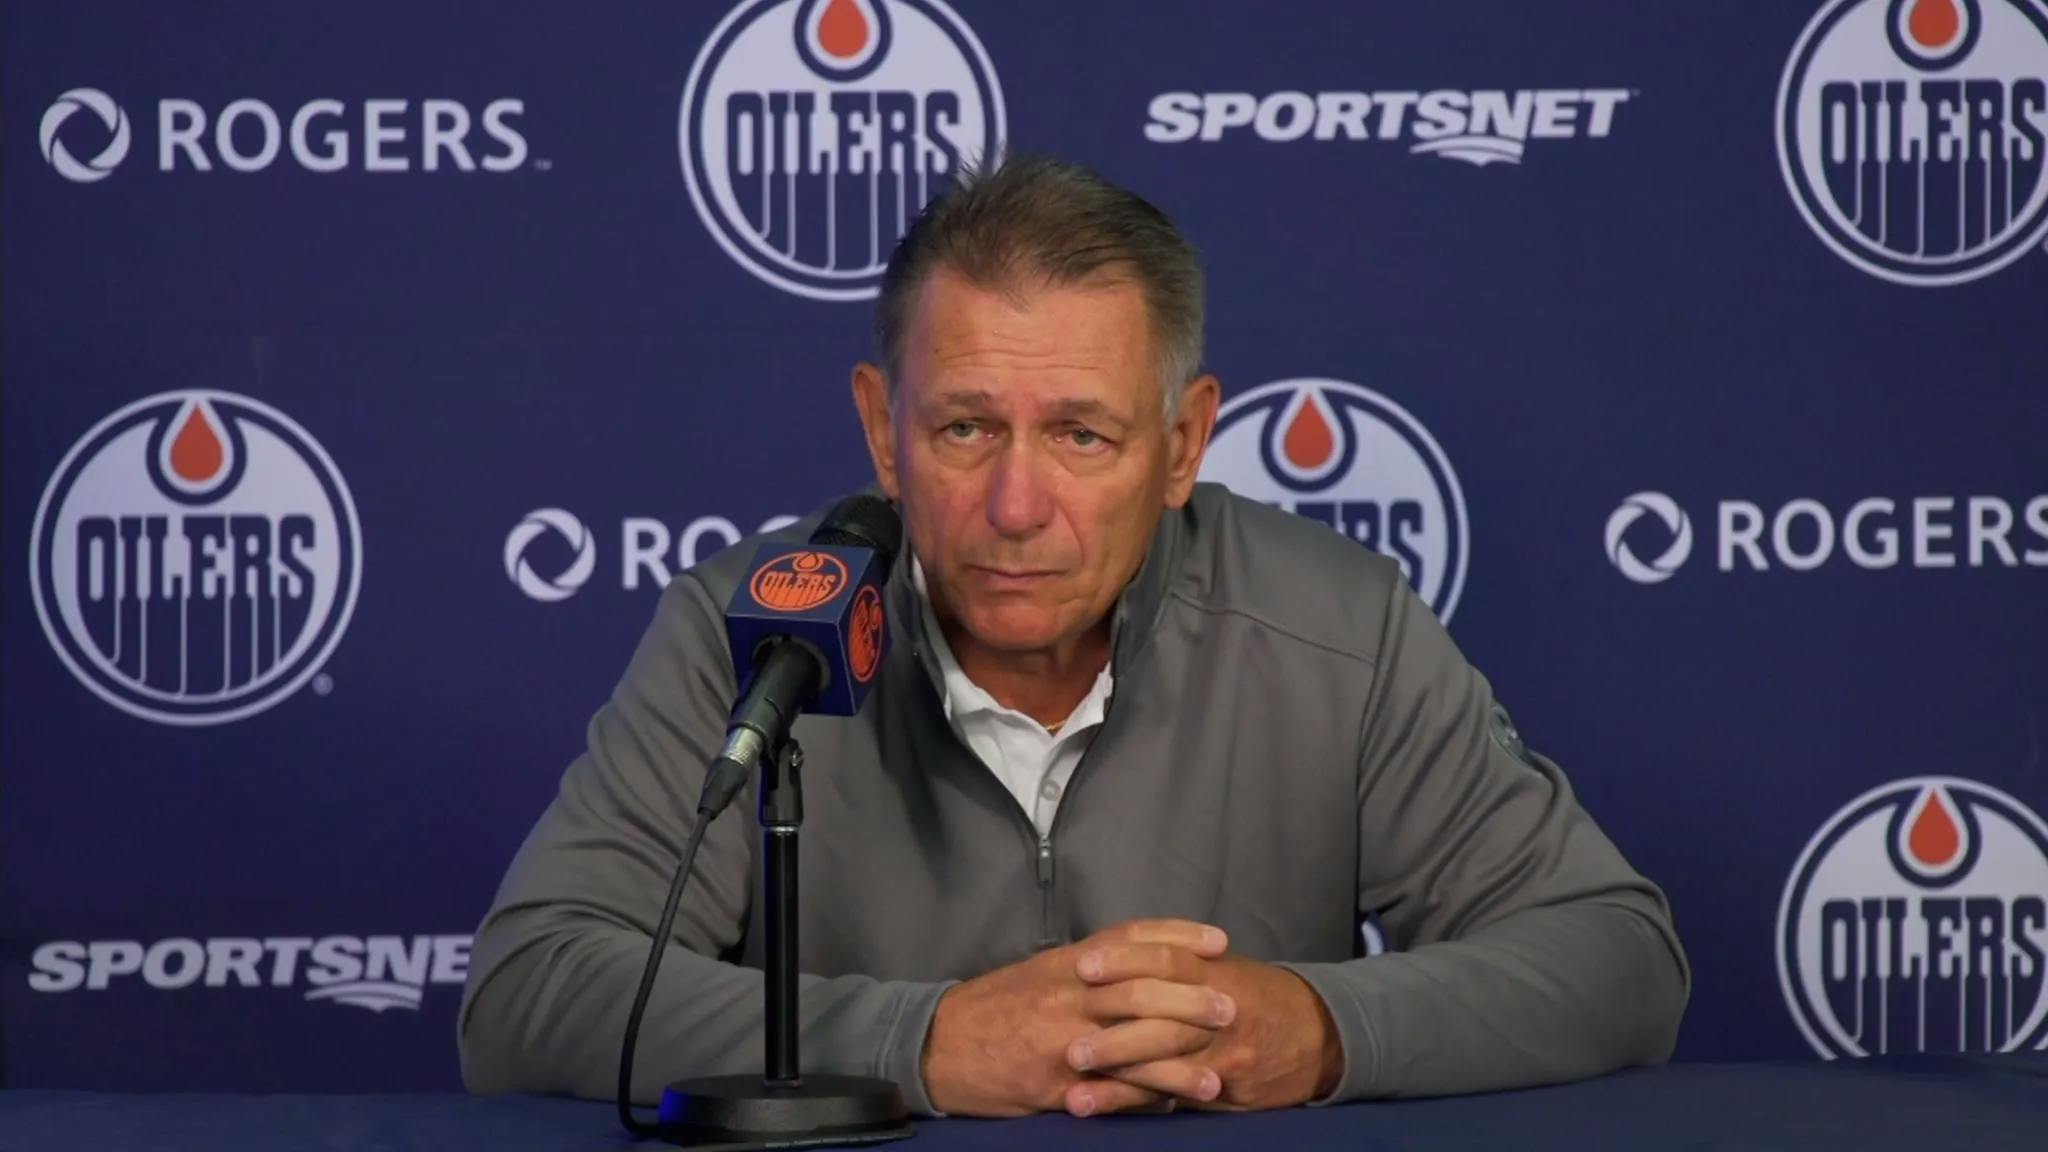 Should Ken Holland’s job be in jeopardy with the Edmonton Oilers?